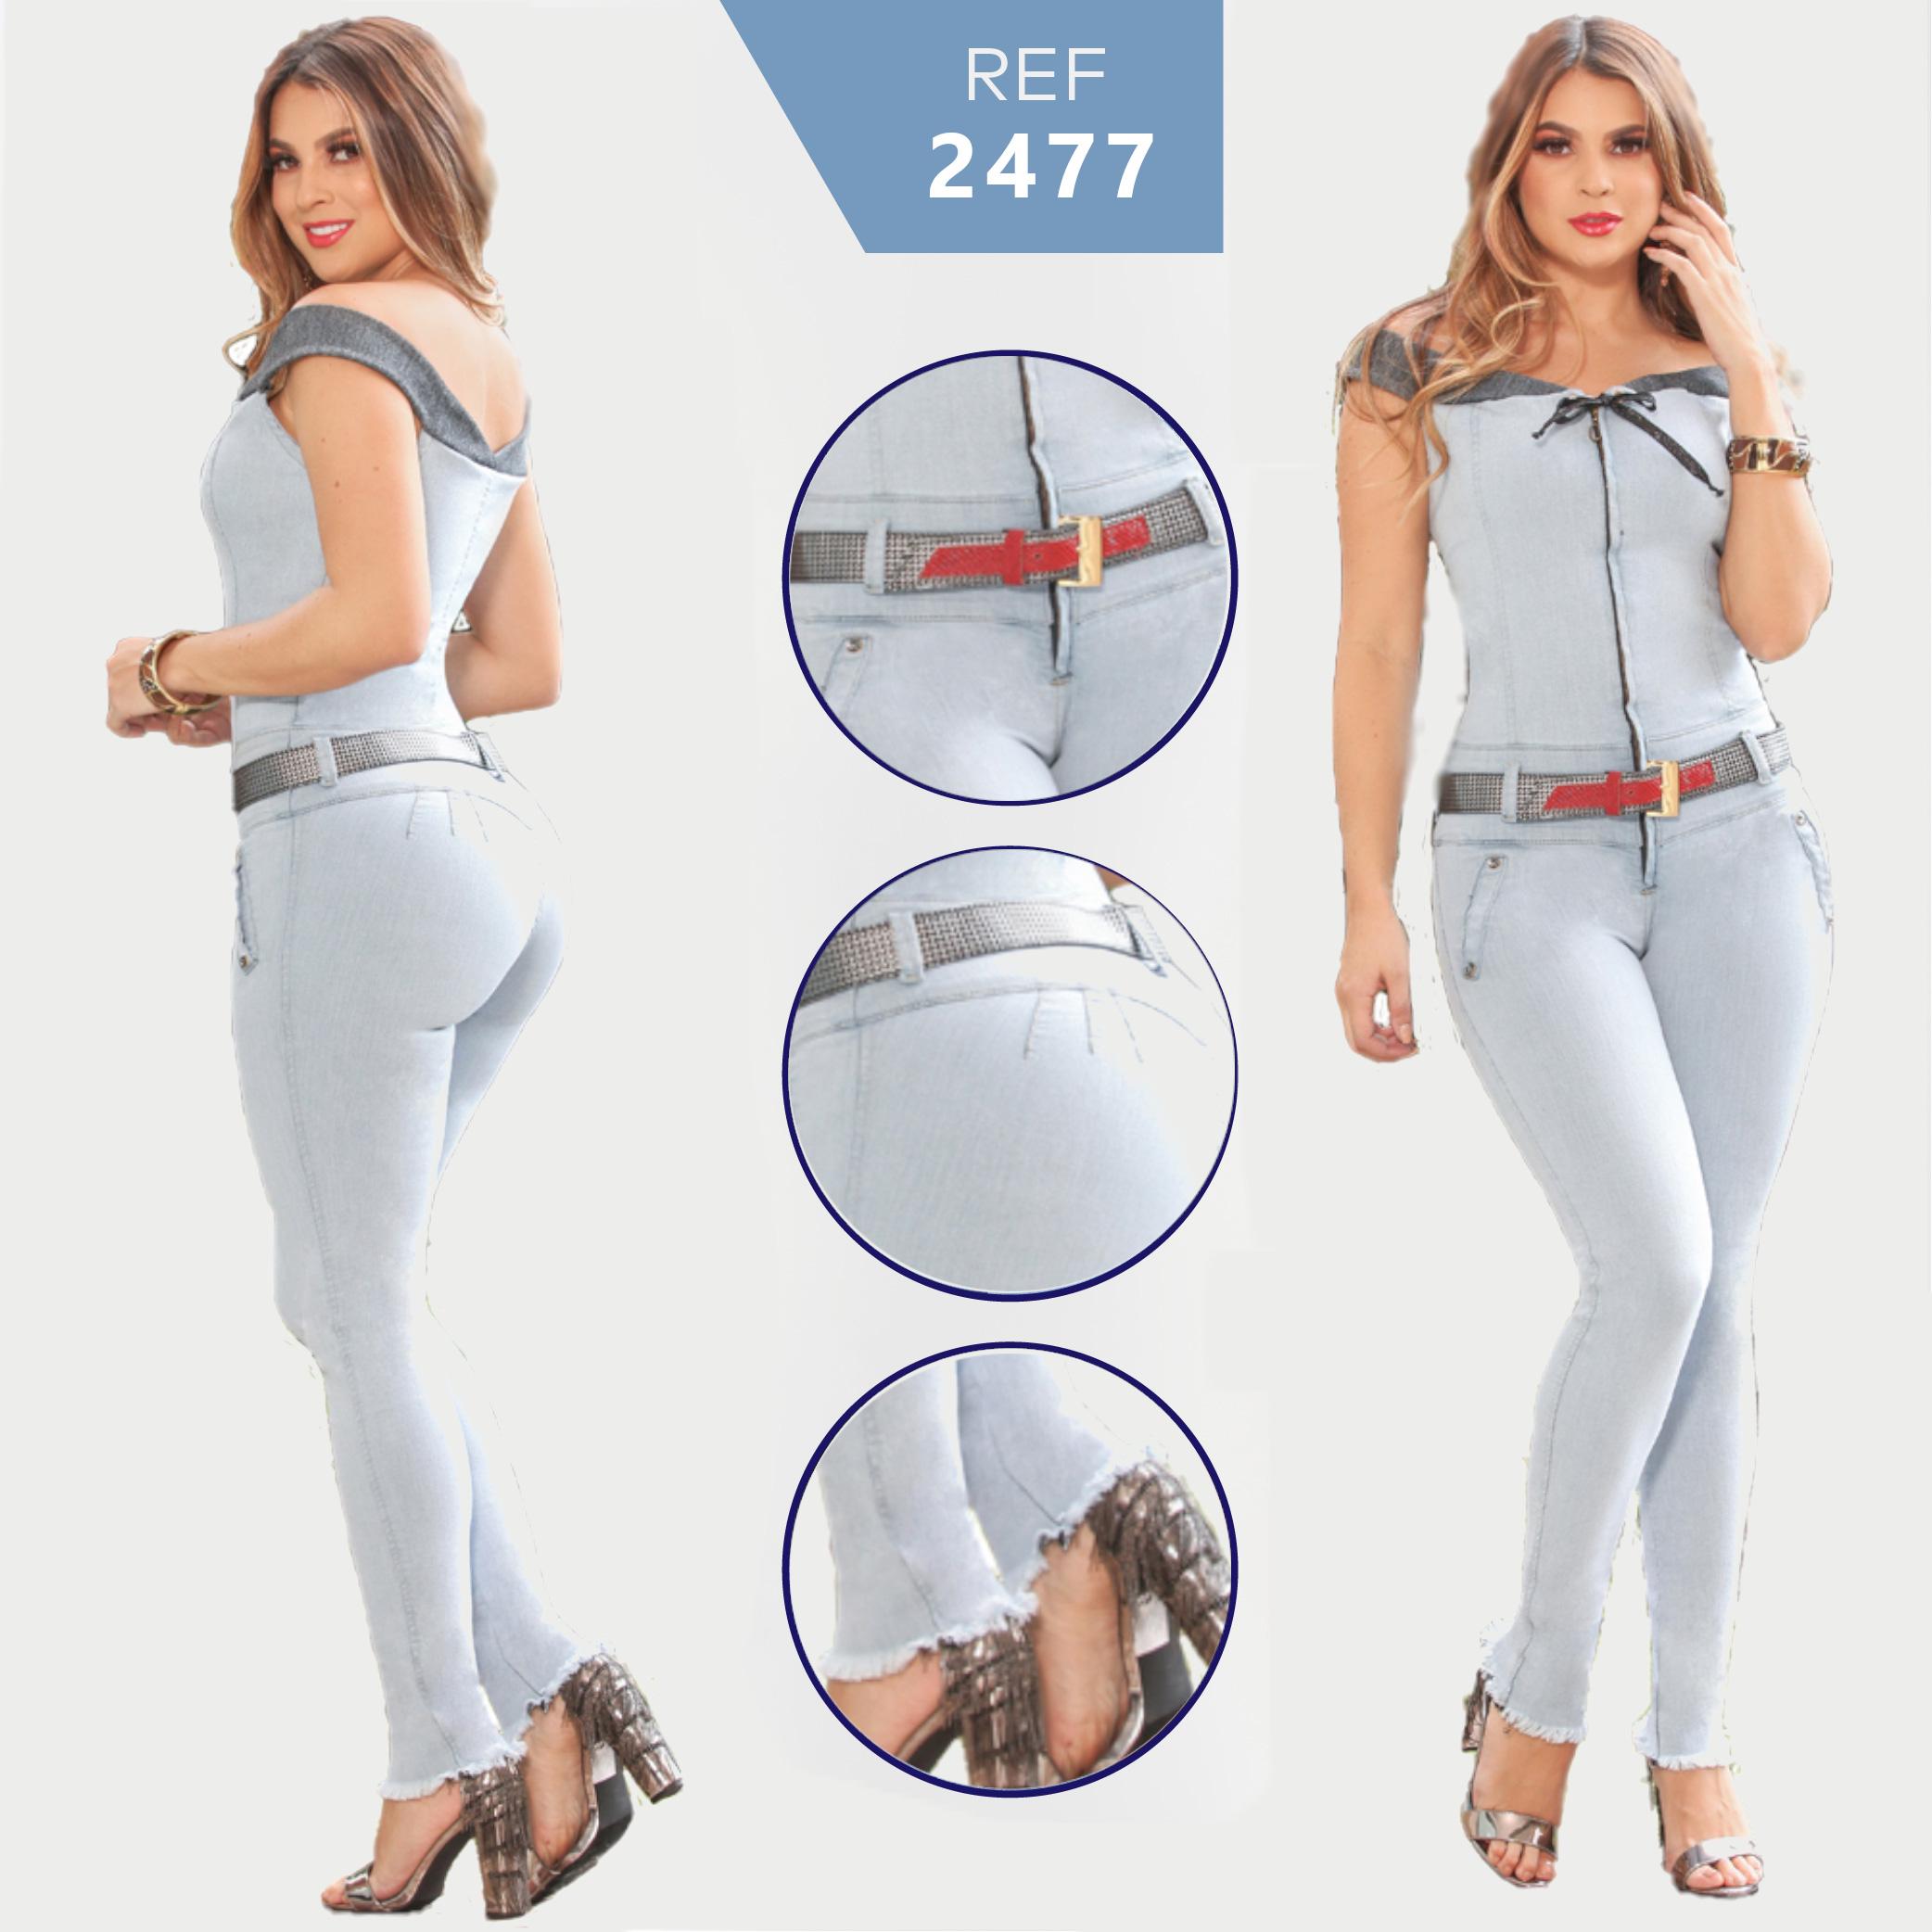 Sleeveless jumpsuit with push-up design made in Colombia